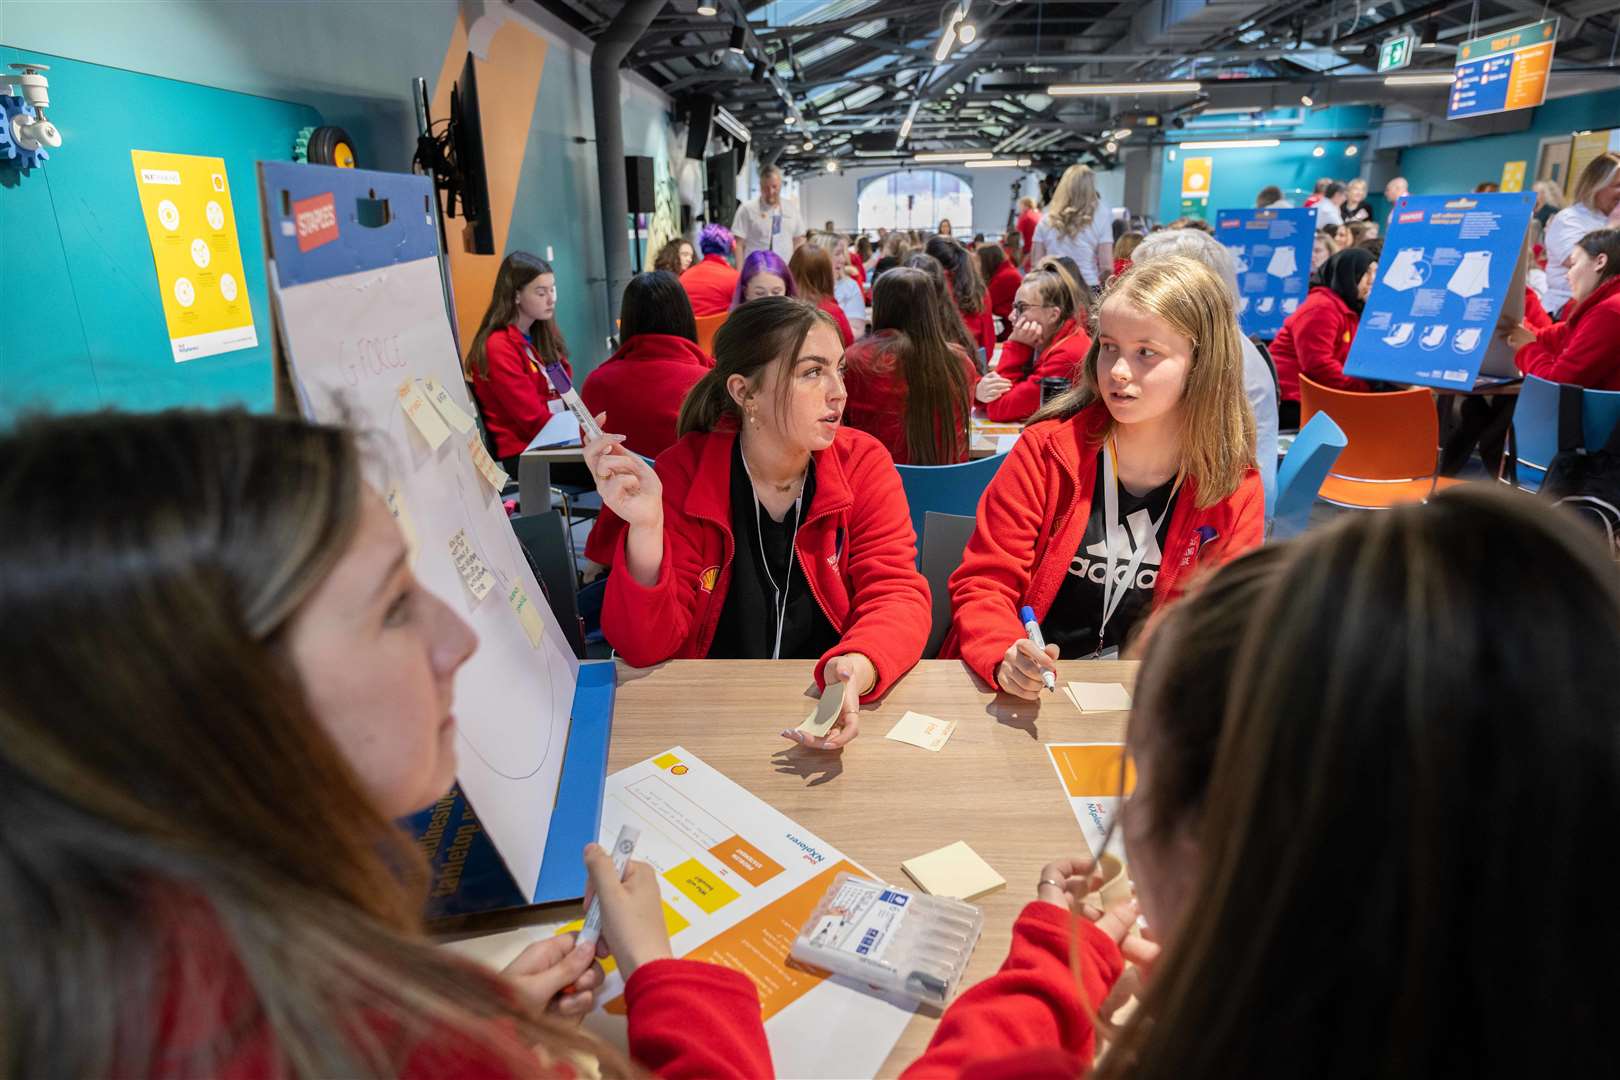 Girls in Energy participants working together to solve challenges...Picture: Jonathan Addie/Michal Wachucik/Abermedia.